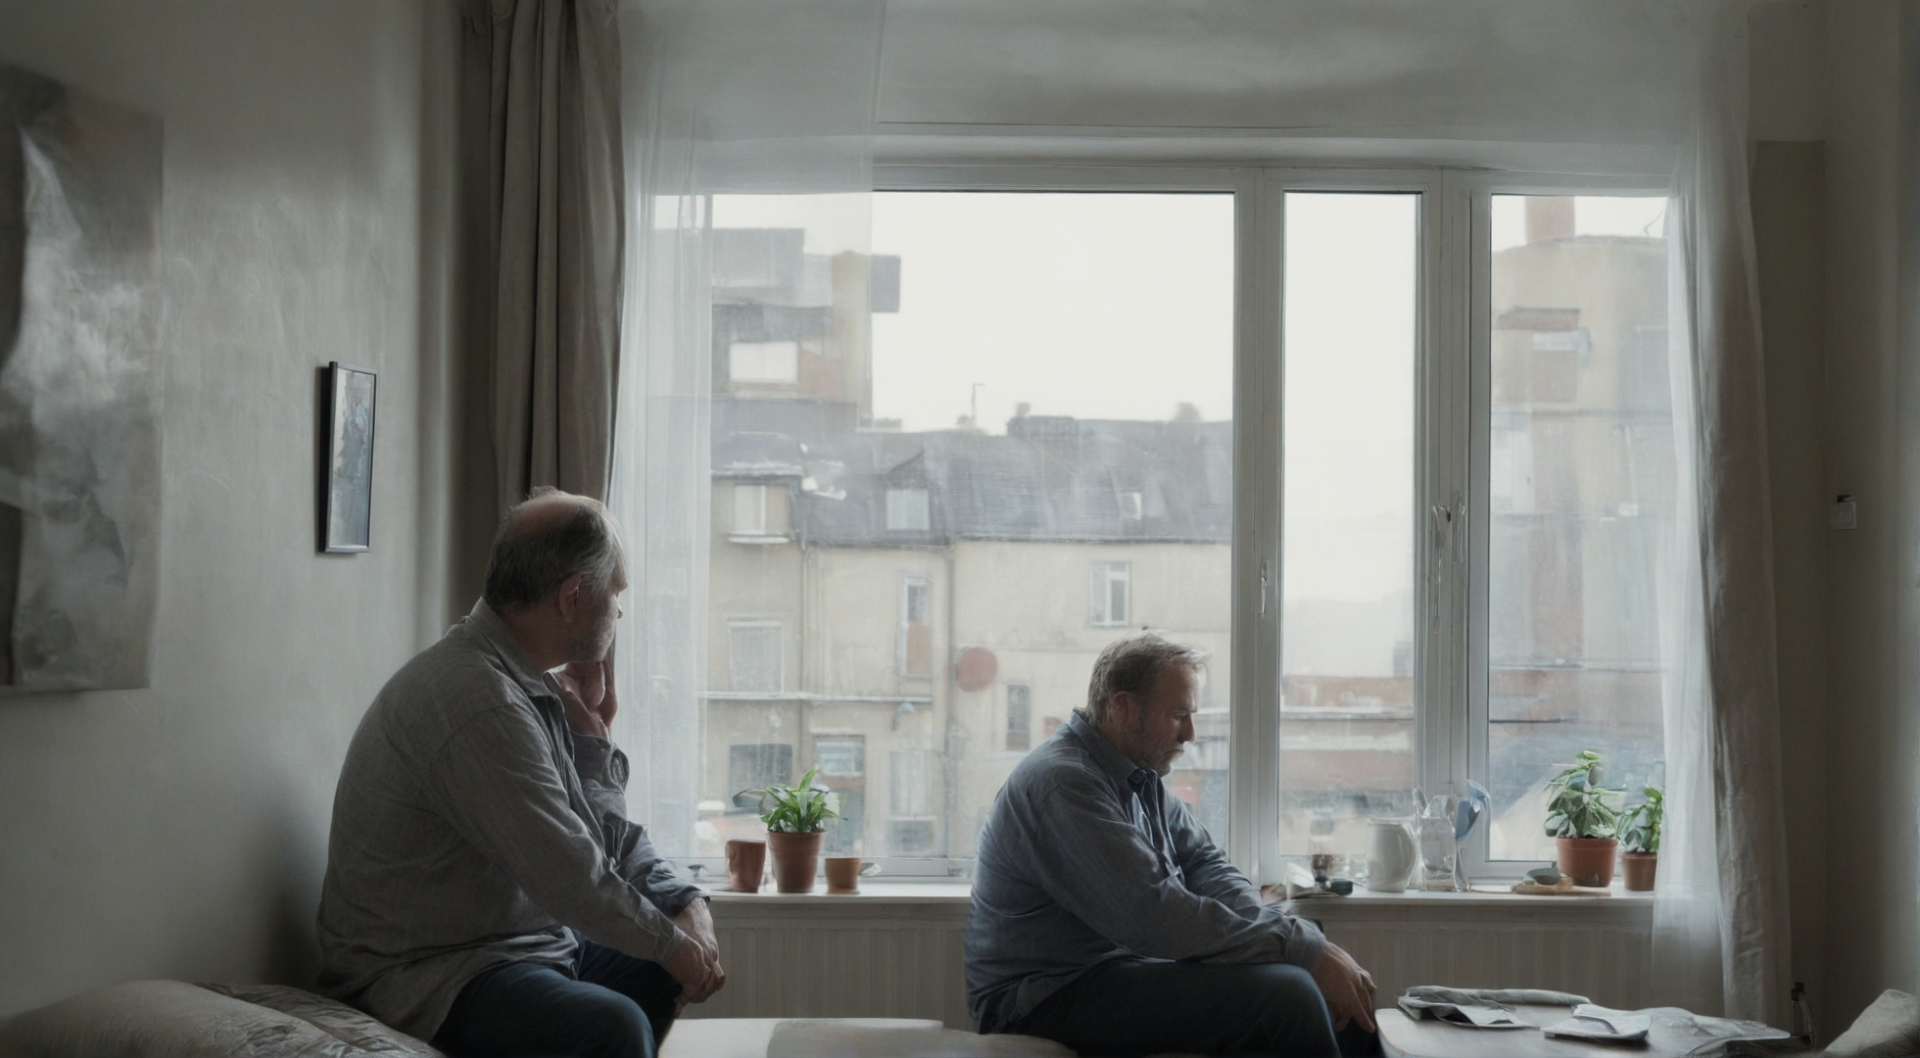 A middle-aged man sitting alone in his apartment, staring out the window